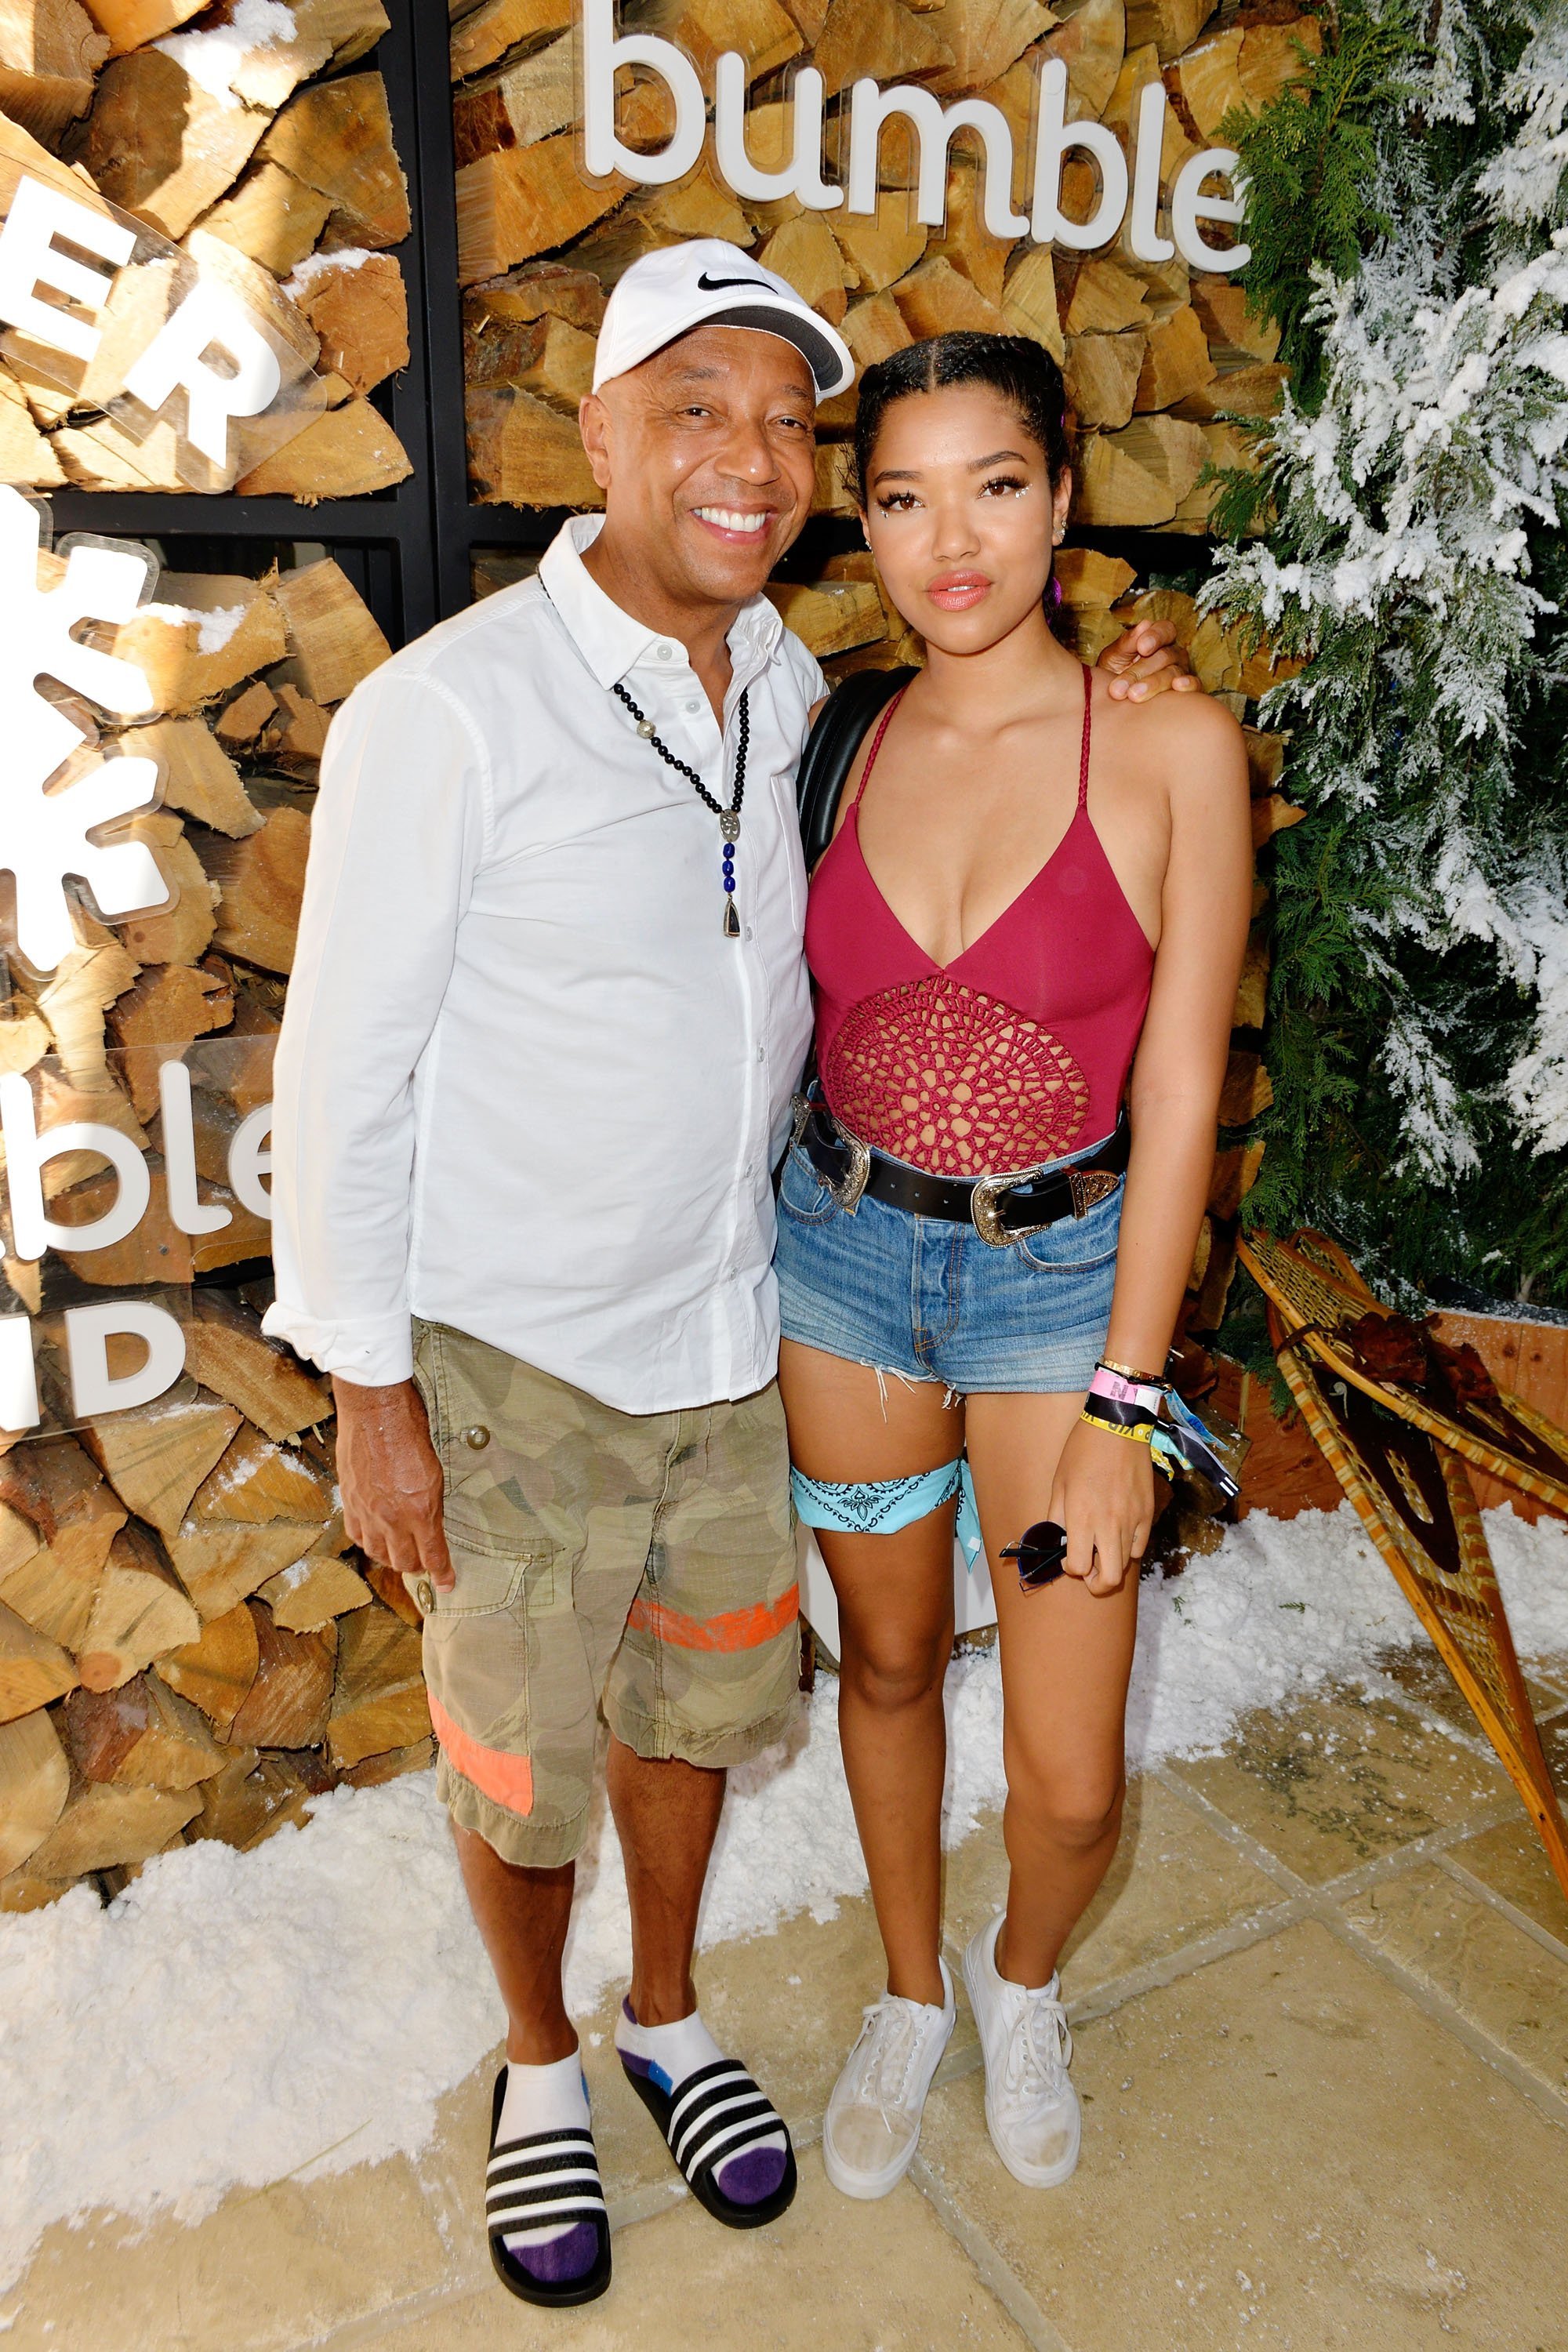 Russell Simmons and Ming Lee Simmons at Winter Bumbleland - Day 2 on April 16, 2017 in California | Photo: Getty Images